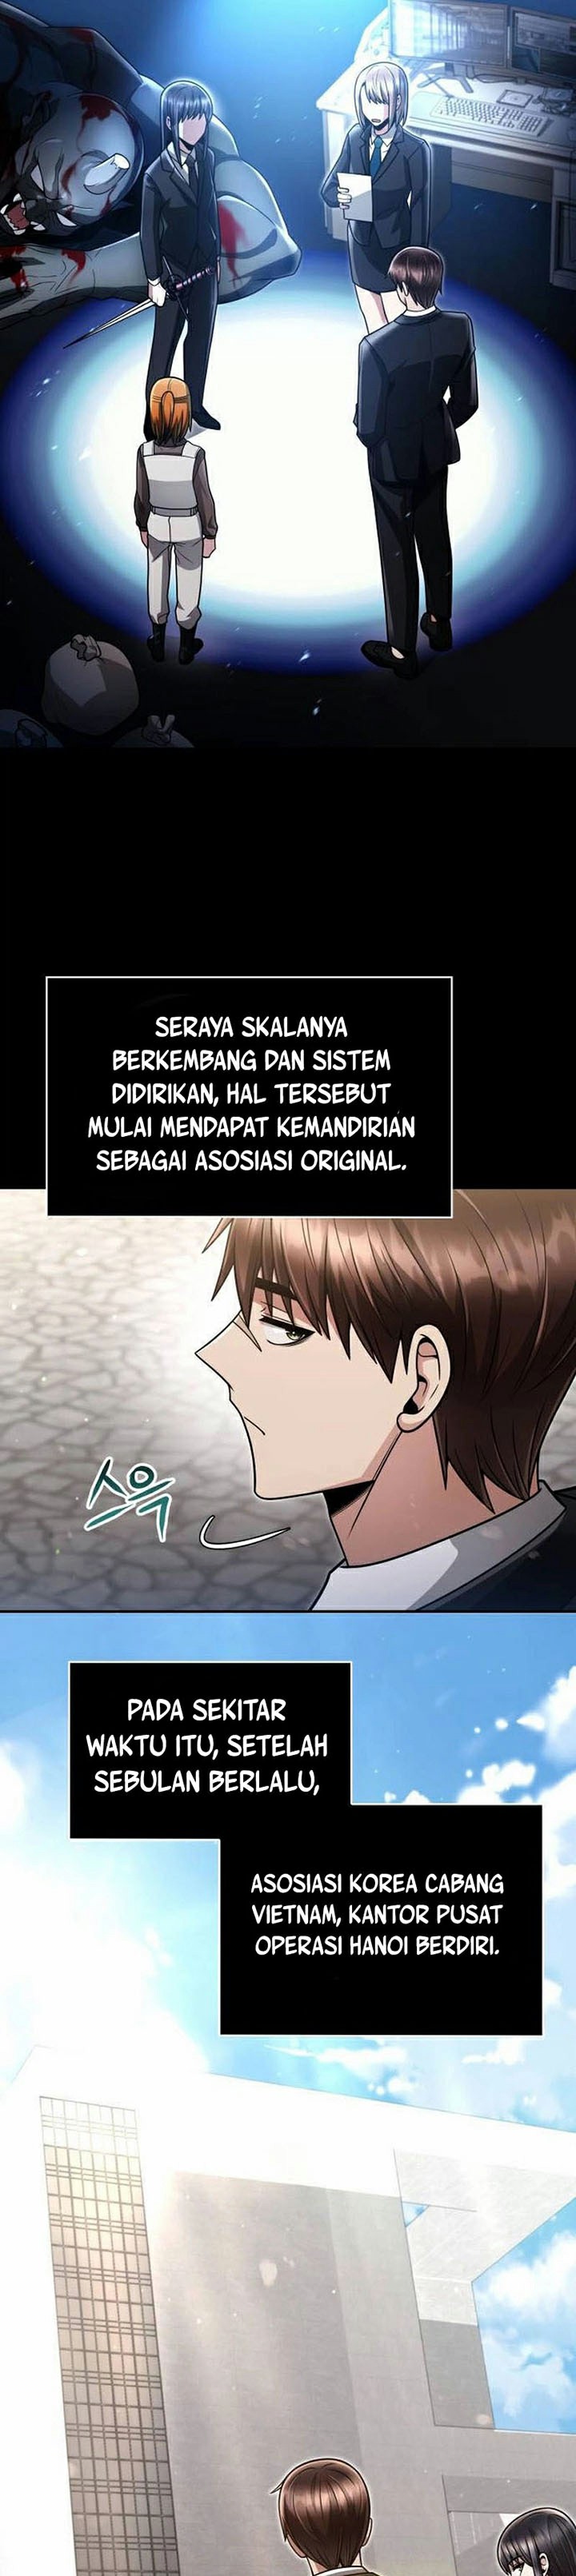 Dilarang COPAS - situs resmi www.mangacanblog.com - Komik clever cleaning life of the returned genius hunter 062 - chapter 62 63 Indonesia clever cleaning life of the returned genius hunter 062 - chapter 62 Terbaru 5|Baca Manga Komik Indonesia|Mangacan